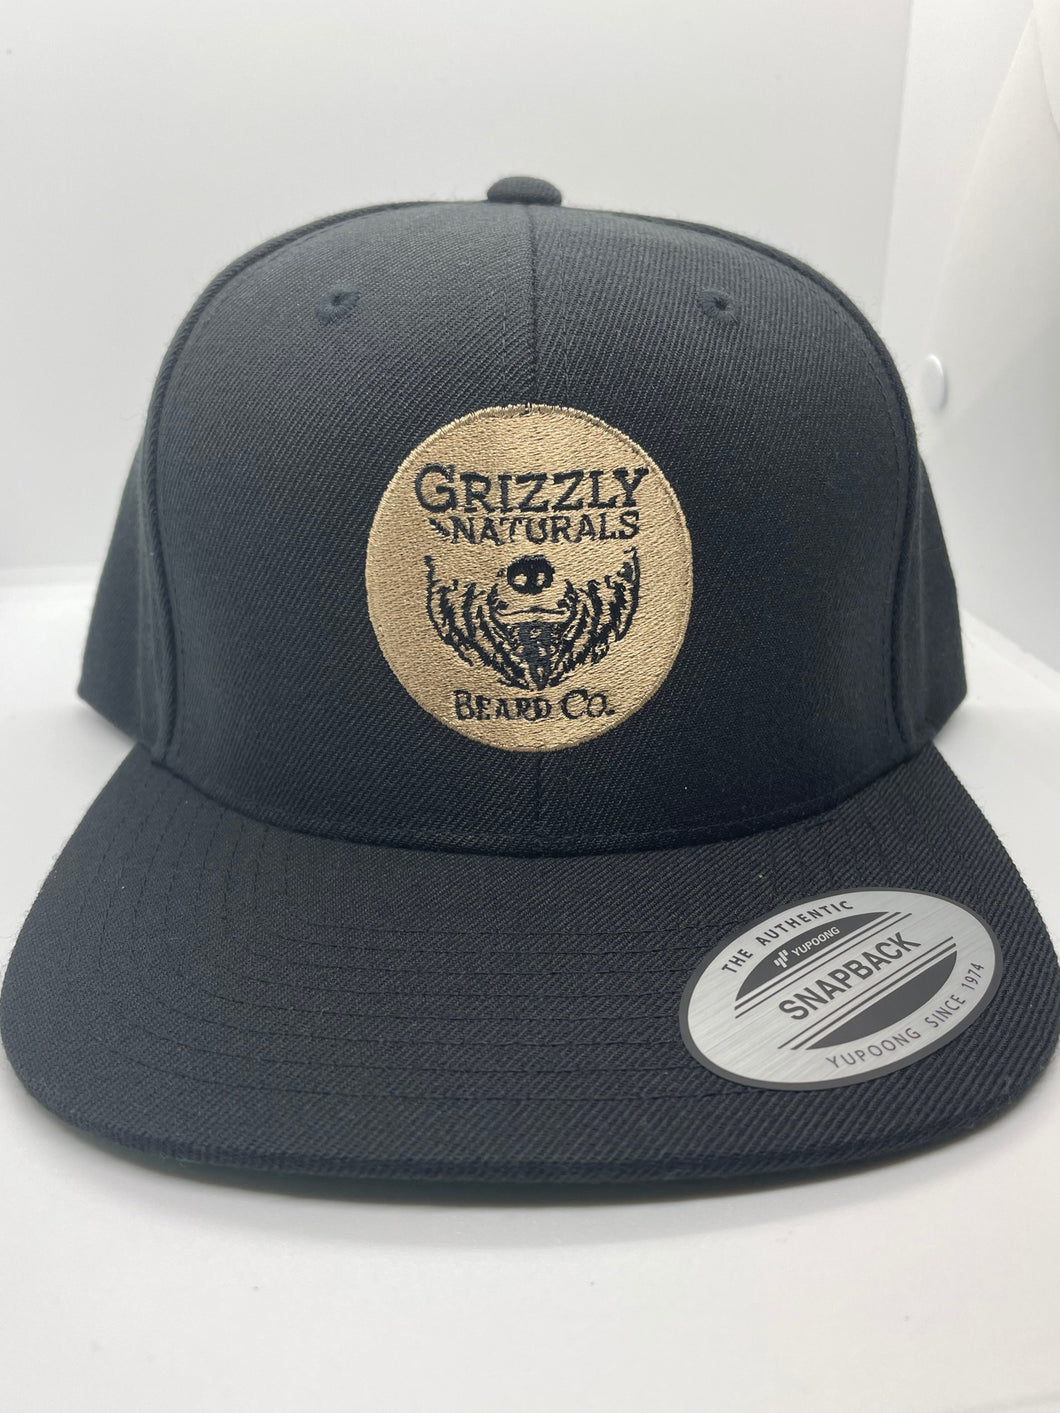 Grizzly Naturals Beard Co. SnapBack Hat